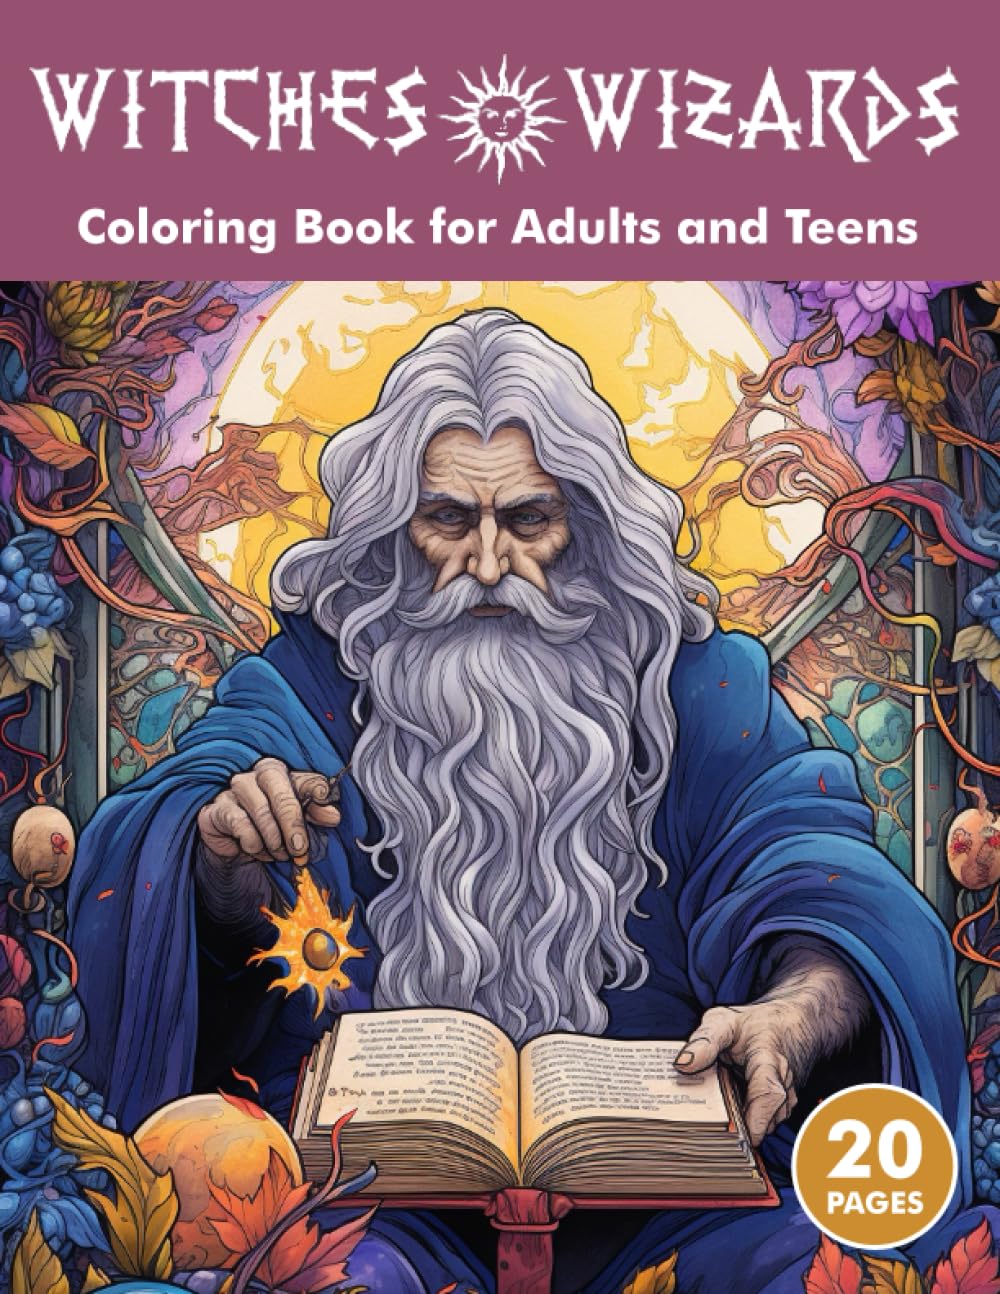 Witches and Wizards: Fantasy Adult and Teen Coloring Book for Stress Relief